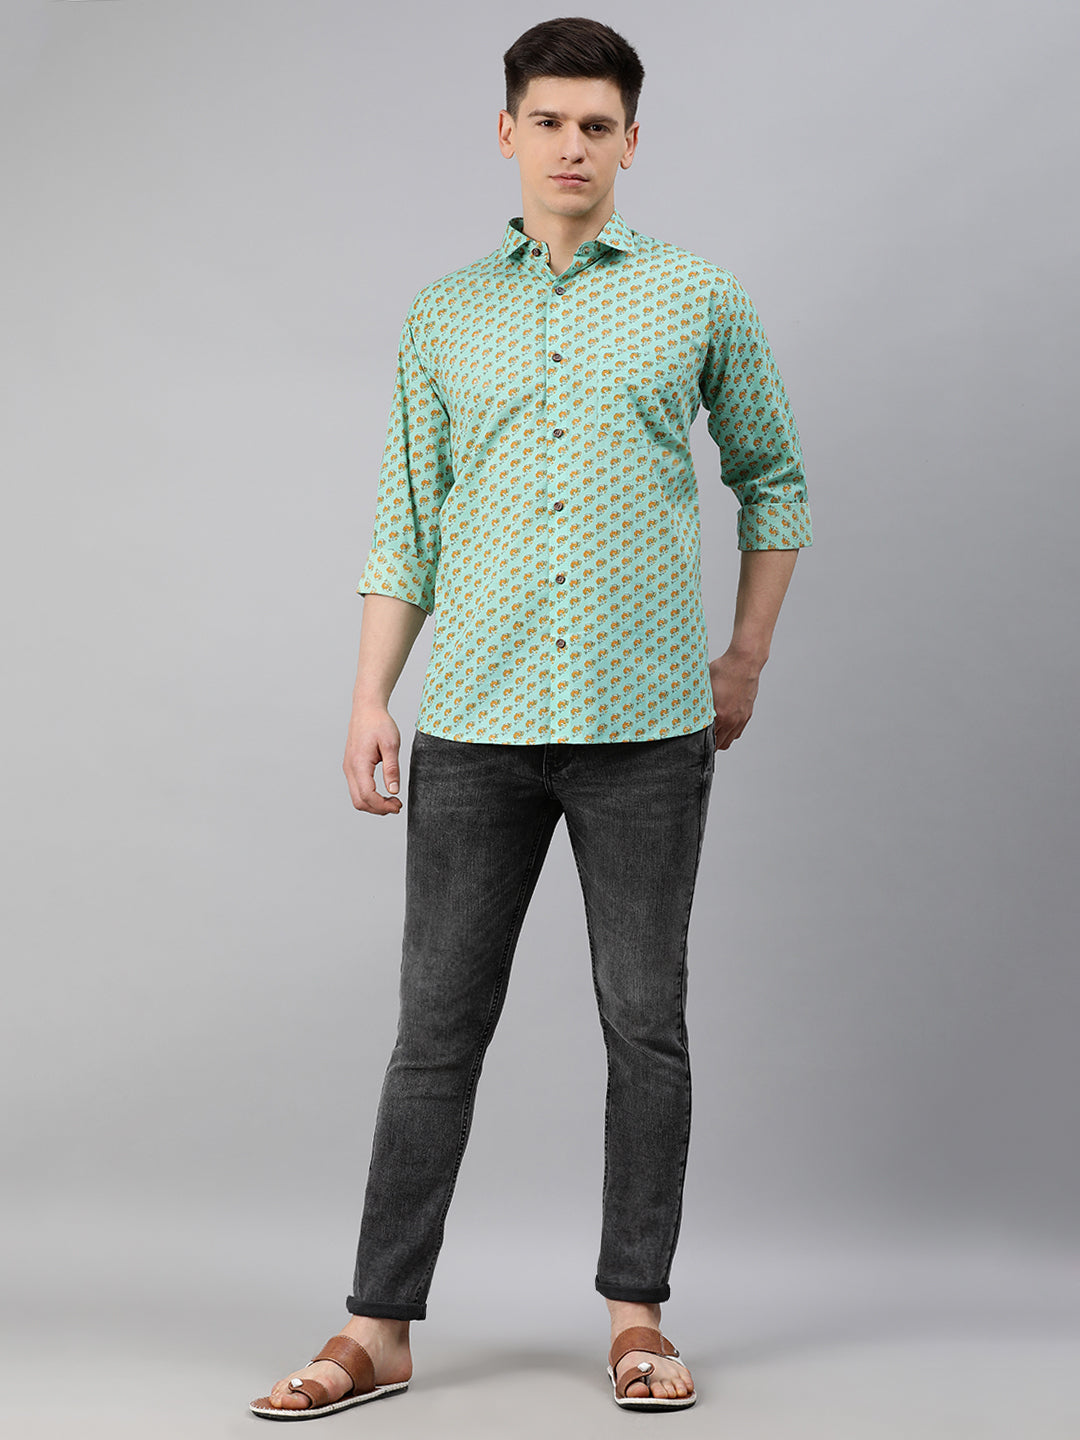 Sea Green Cotton Full Sleeves Shirts For Men